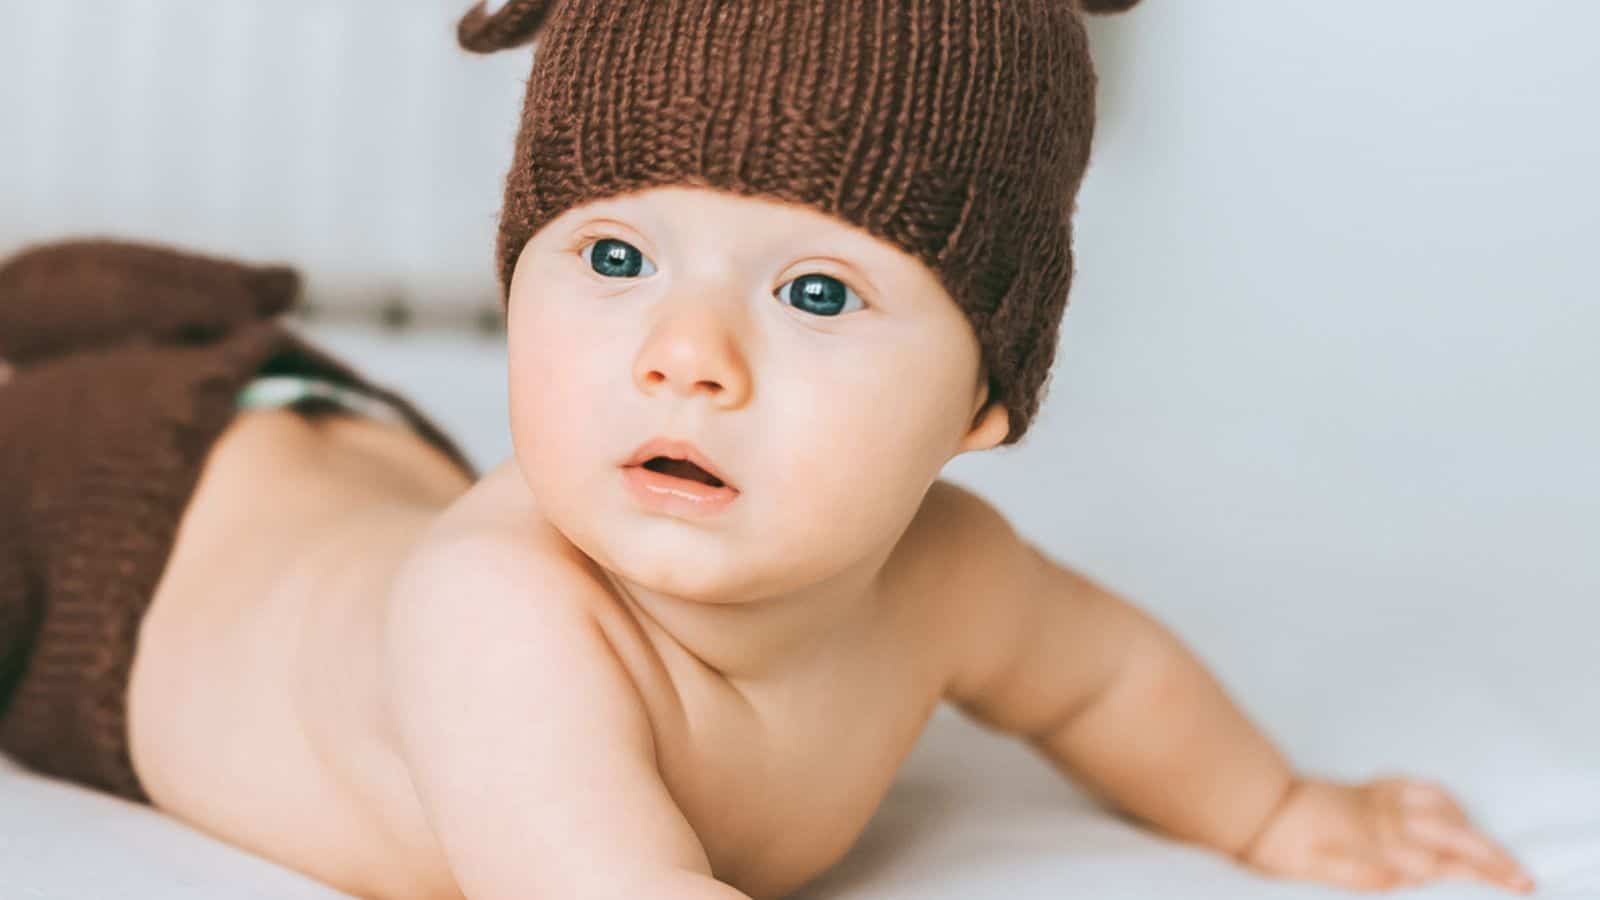 Close-up portrait of adorable infant child in knitted deer costume in bed